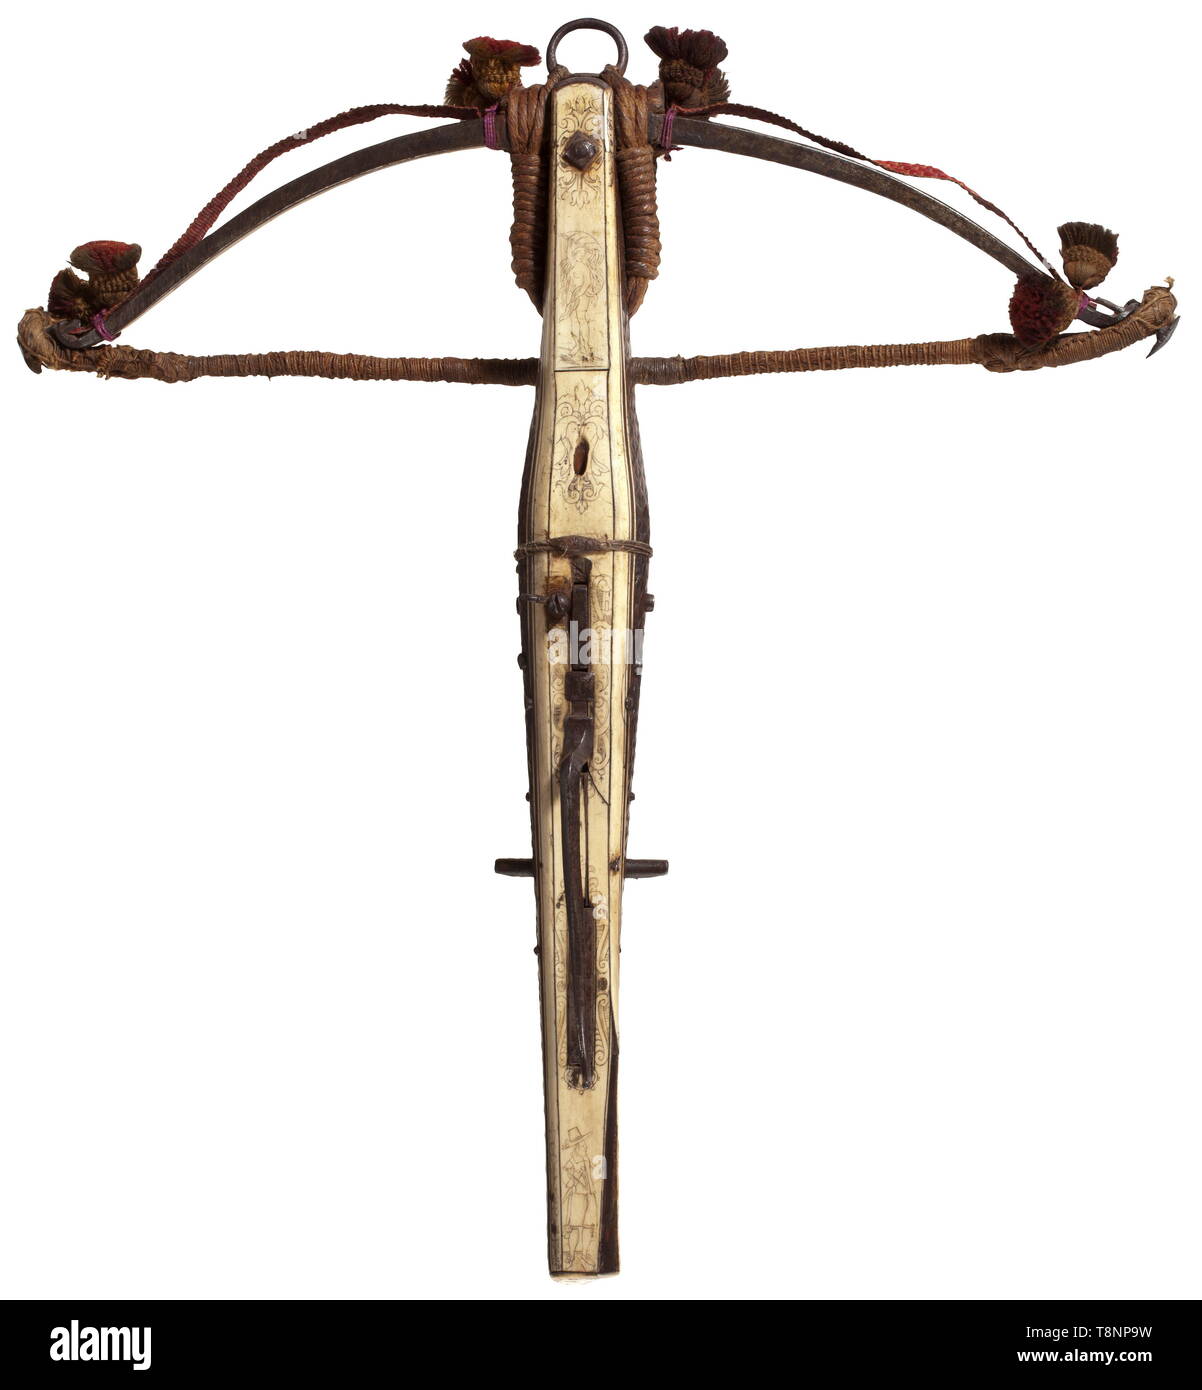 A German hunting crossbow, 17th century Heavy iron prod with a woven lanyard and woollen tassels, later hemp bowstring, retained by cords. Slightly bulgy tiller with carvings at the sides, the upper and lower surfaces with bone inlays and finely engraved with decorative scrollwork and tendrils on the top, and depictions of a hunter and the Birth of Venus at the lower side. Original, finely chiselled iron aperture sight. Bolt-clip is missing. Multi-axle lock with iron trigger guard. Length 66 cm. historic, historical, crossbow, crossbows, distance, Additional-Rights-Clearance-Info-Not-Available Stock Photo